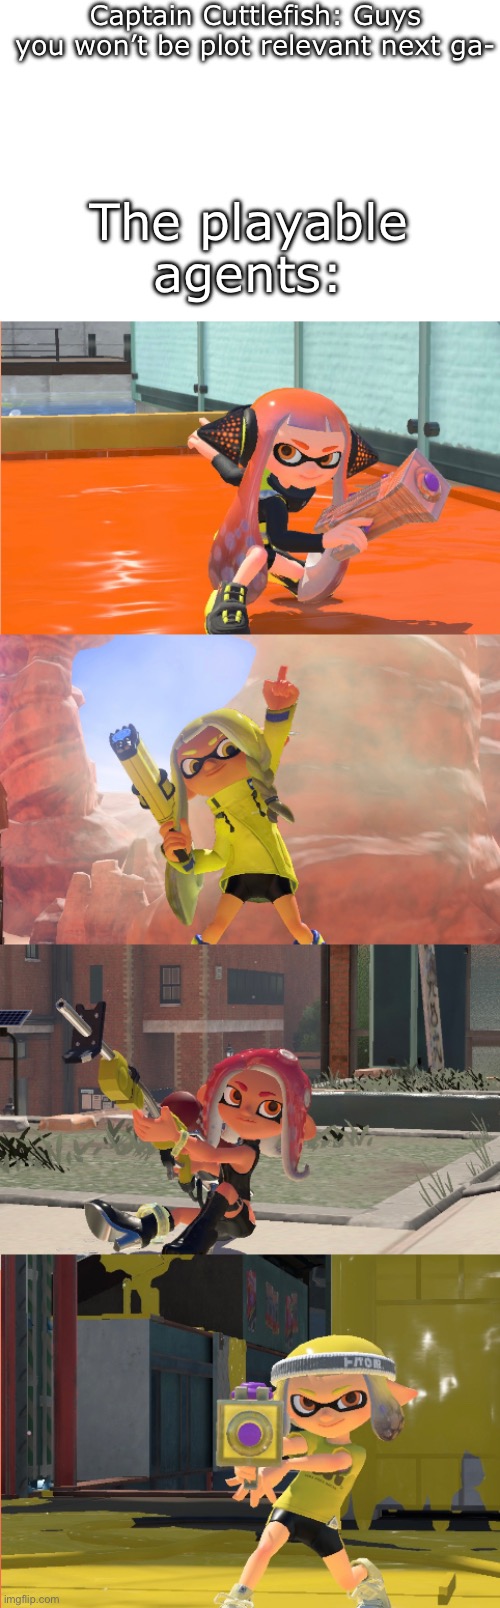 It’s a Splatoon joke, but look at these cool images | Captain Cuttlefish: Guys you won’t be plot relevant next ga-; The playable agents: | image tagged in gaming,nintendo switch,splatoon | made w/ Imgflip meme maker